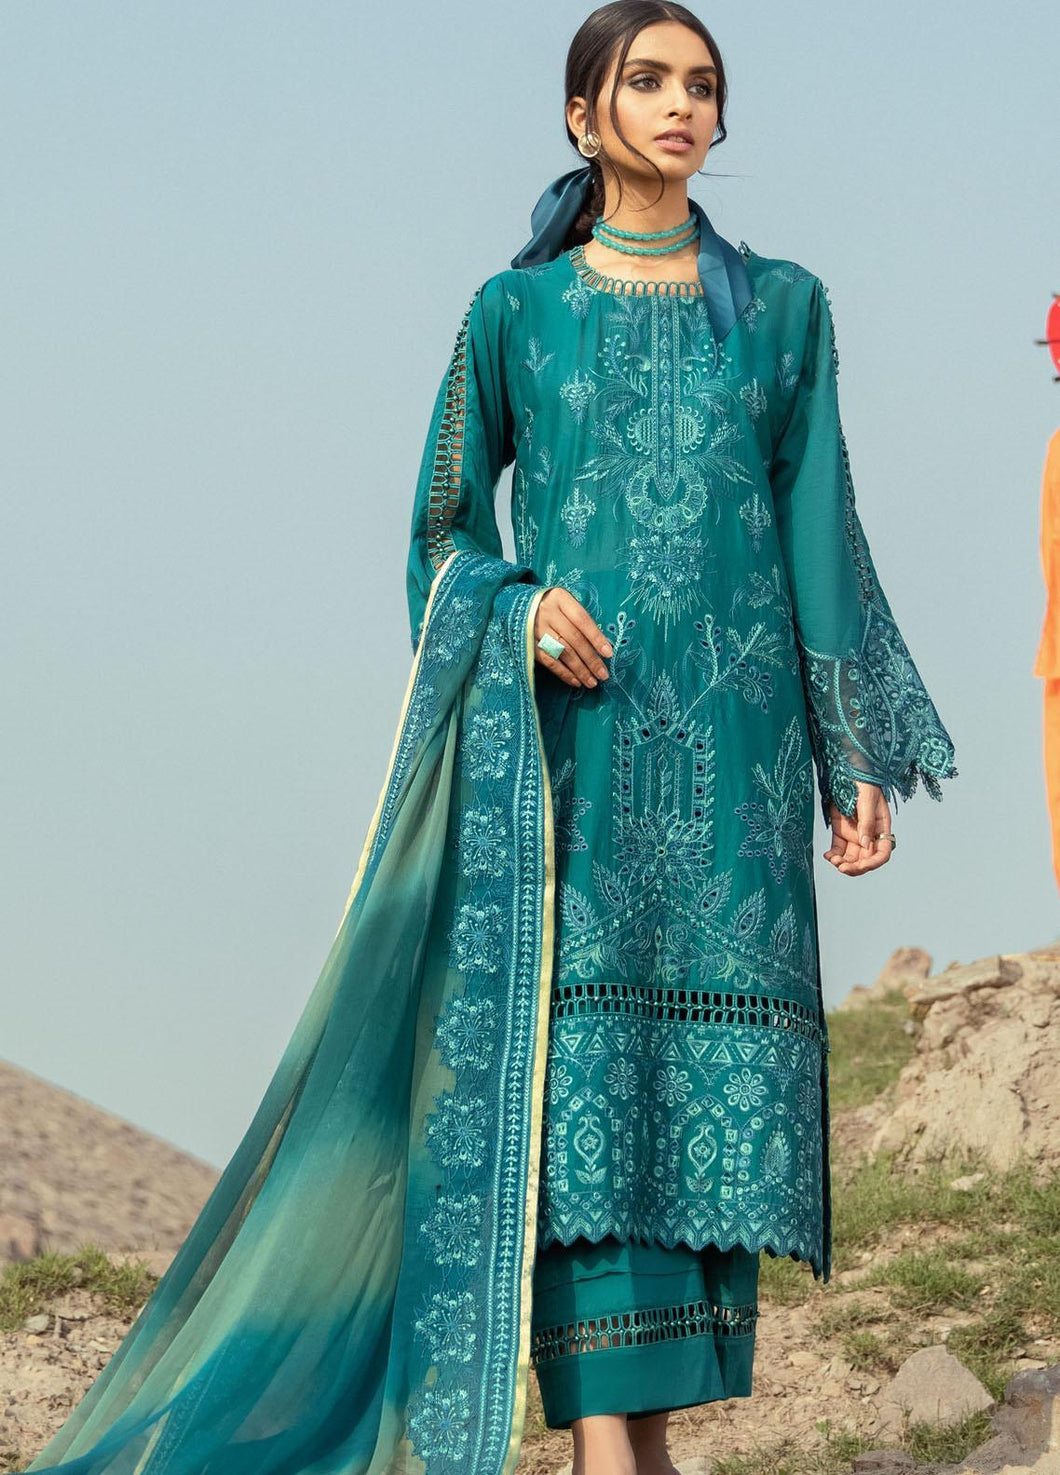 Buy Iznik Luxury Lawn 2021| Neptune | 07 Green Dress at exclusive rates Buy unstitched or customized dresses of IZNIK LAWN 2021, MARIA B M PRINT LUXURY LAWN IMROZIA 2021, Gulal dresses of Evening wear, Party wear and NIKAH OUTFITS ASIAN PARTY WEAR Dresses can be available easily at USA & UK at best price in Sale!